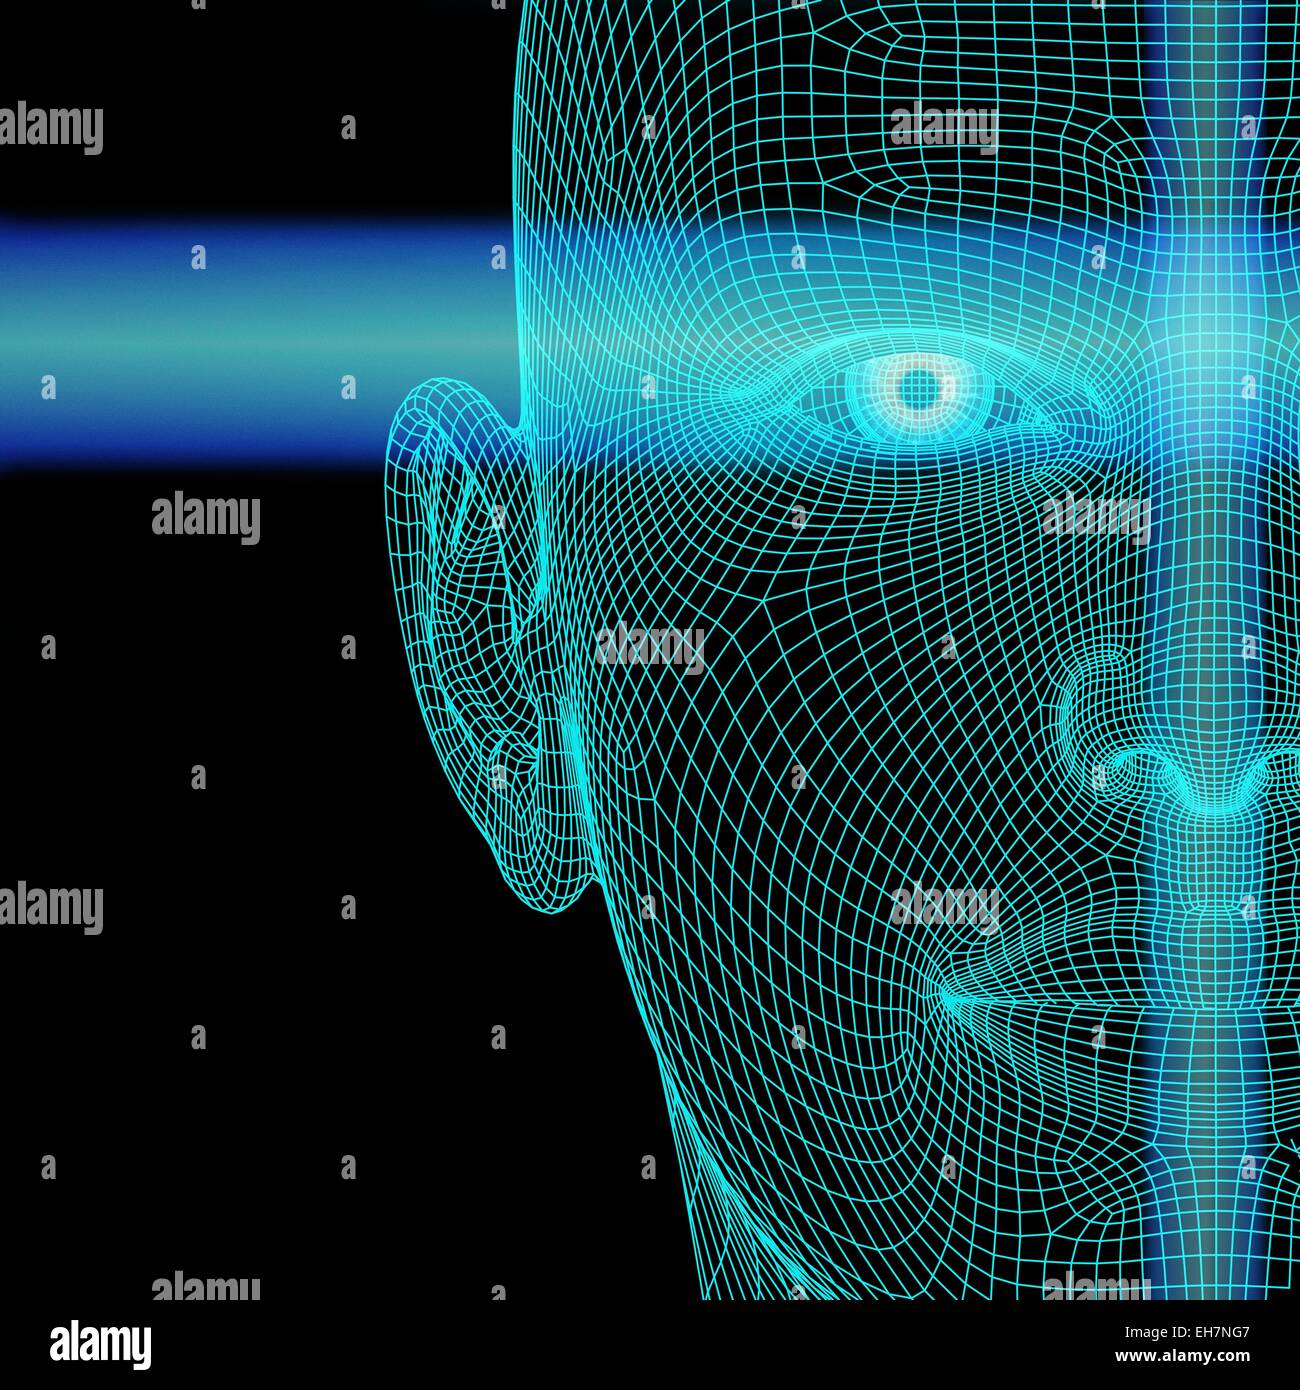 Biometric polygon head with scanlines Stock Photo